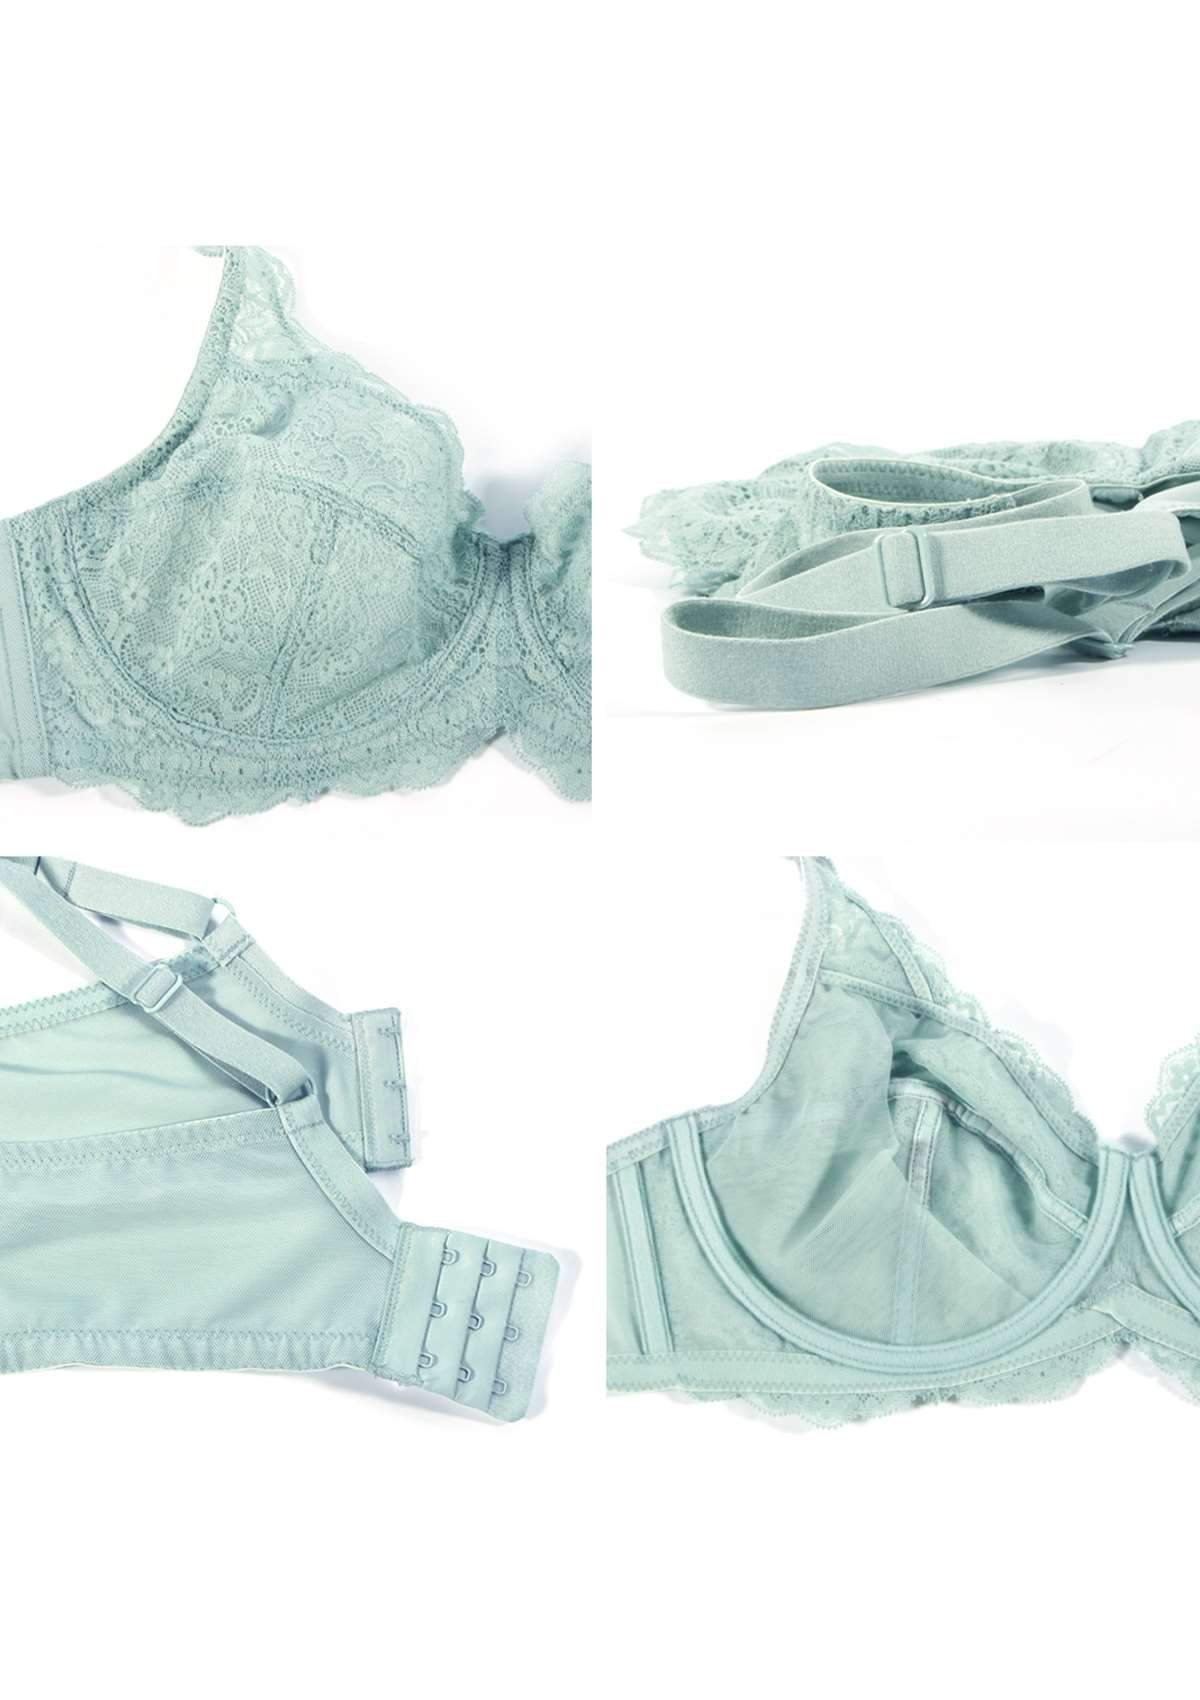 HSIA All-Over Floral Lace: Best Bra For Elderly With Sagging Breasts - Pewter Blue / 38 / C